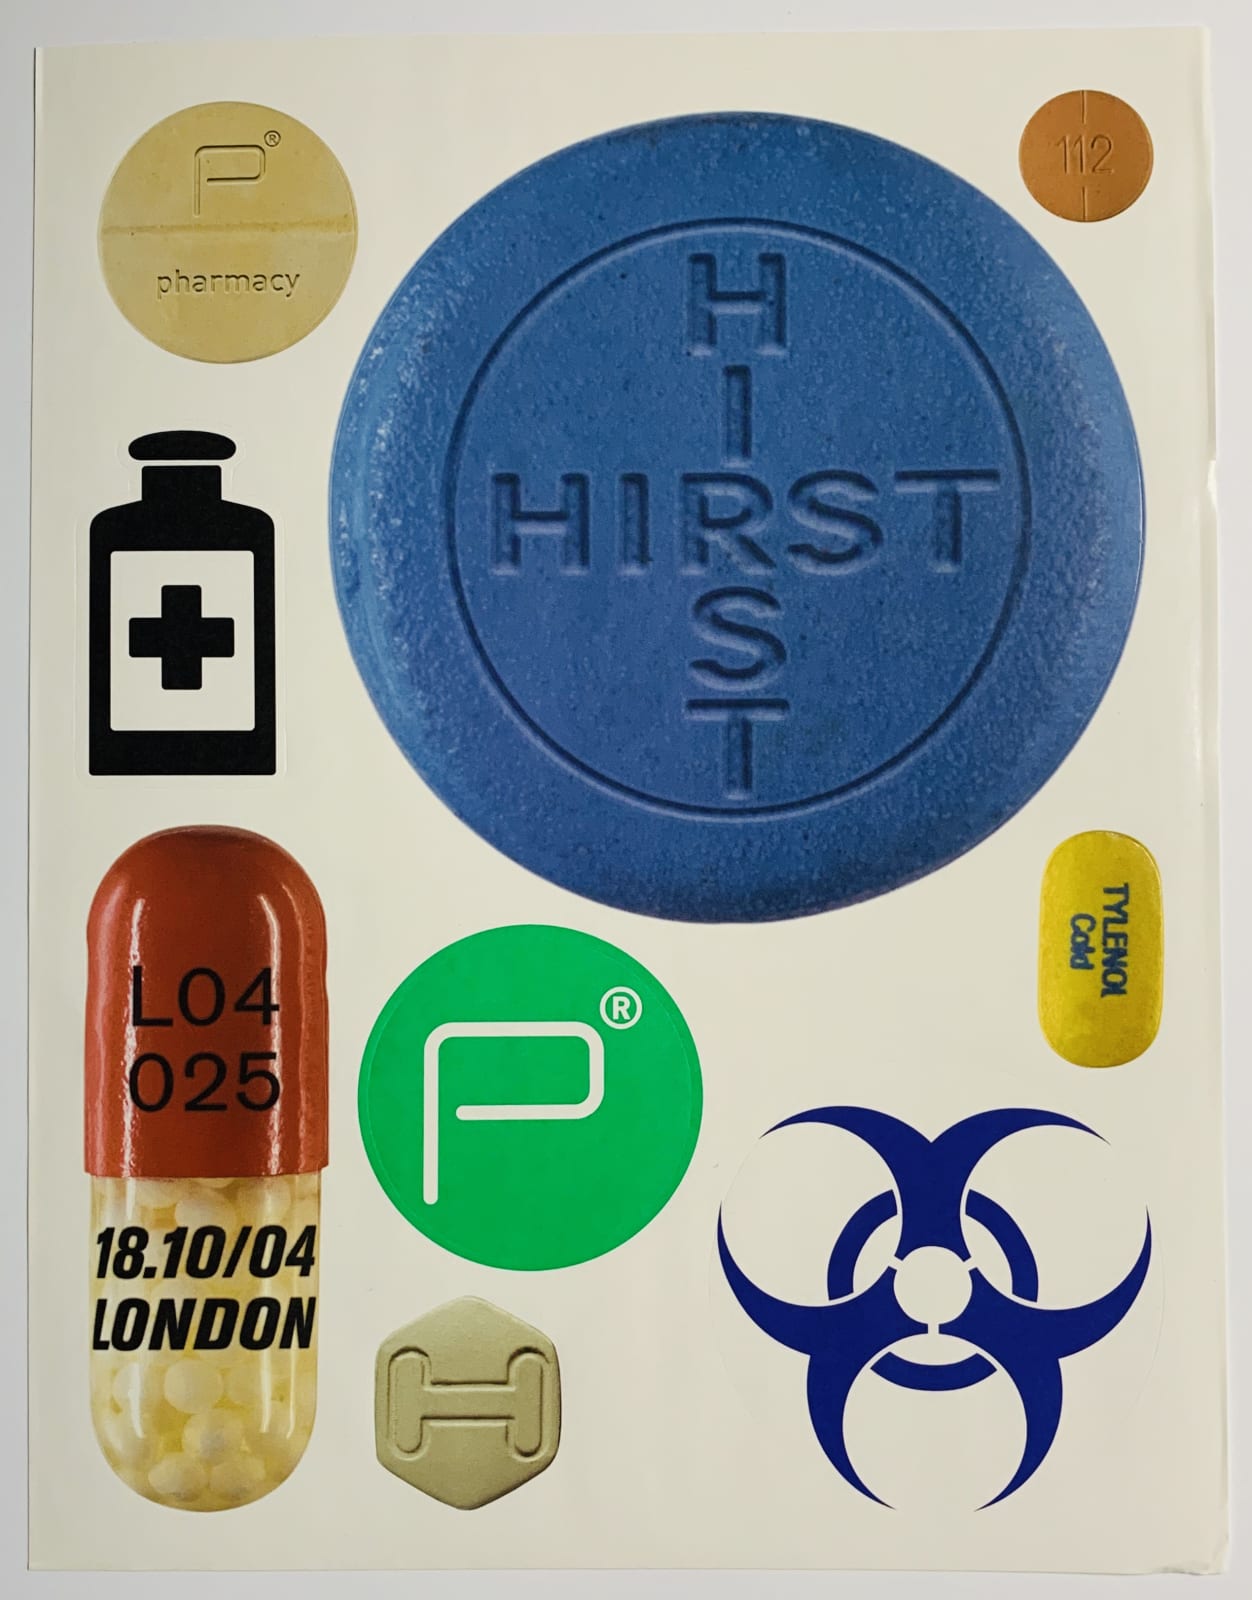 Damien Hirst, Damien Hirst's Pharmacy (Sotheby's auction catalogue